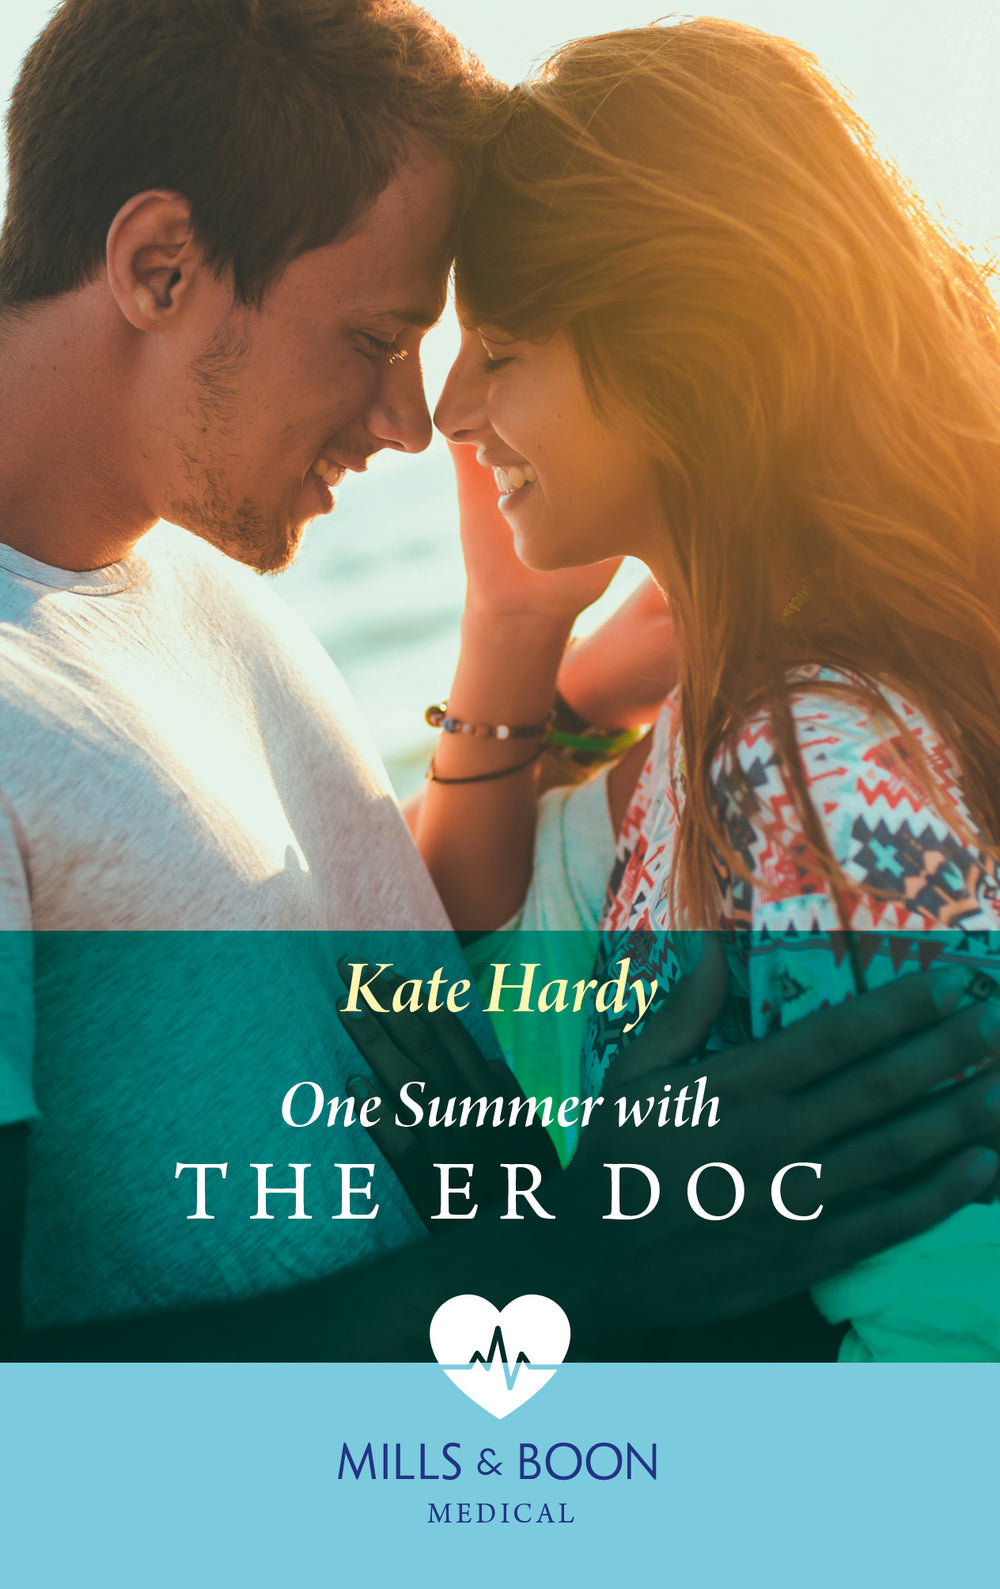 One Summer with the ER Doc